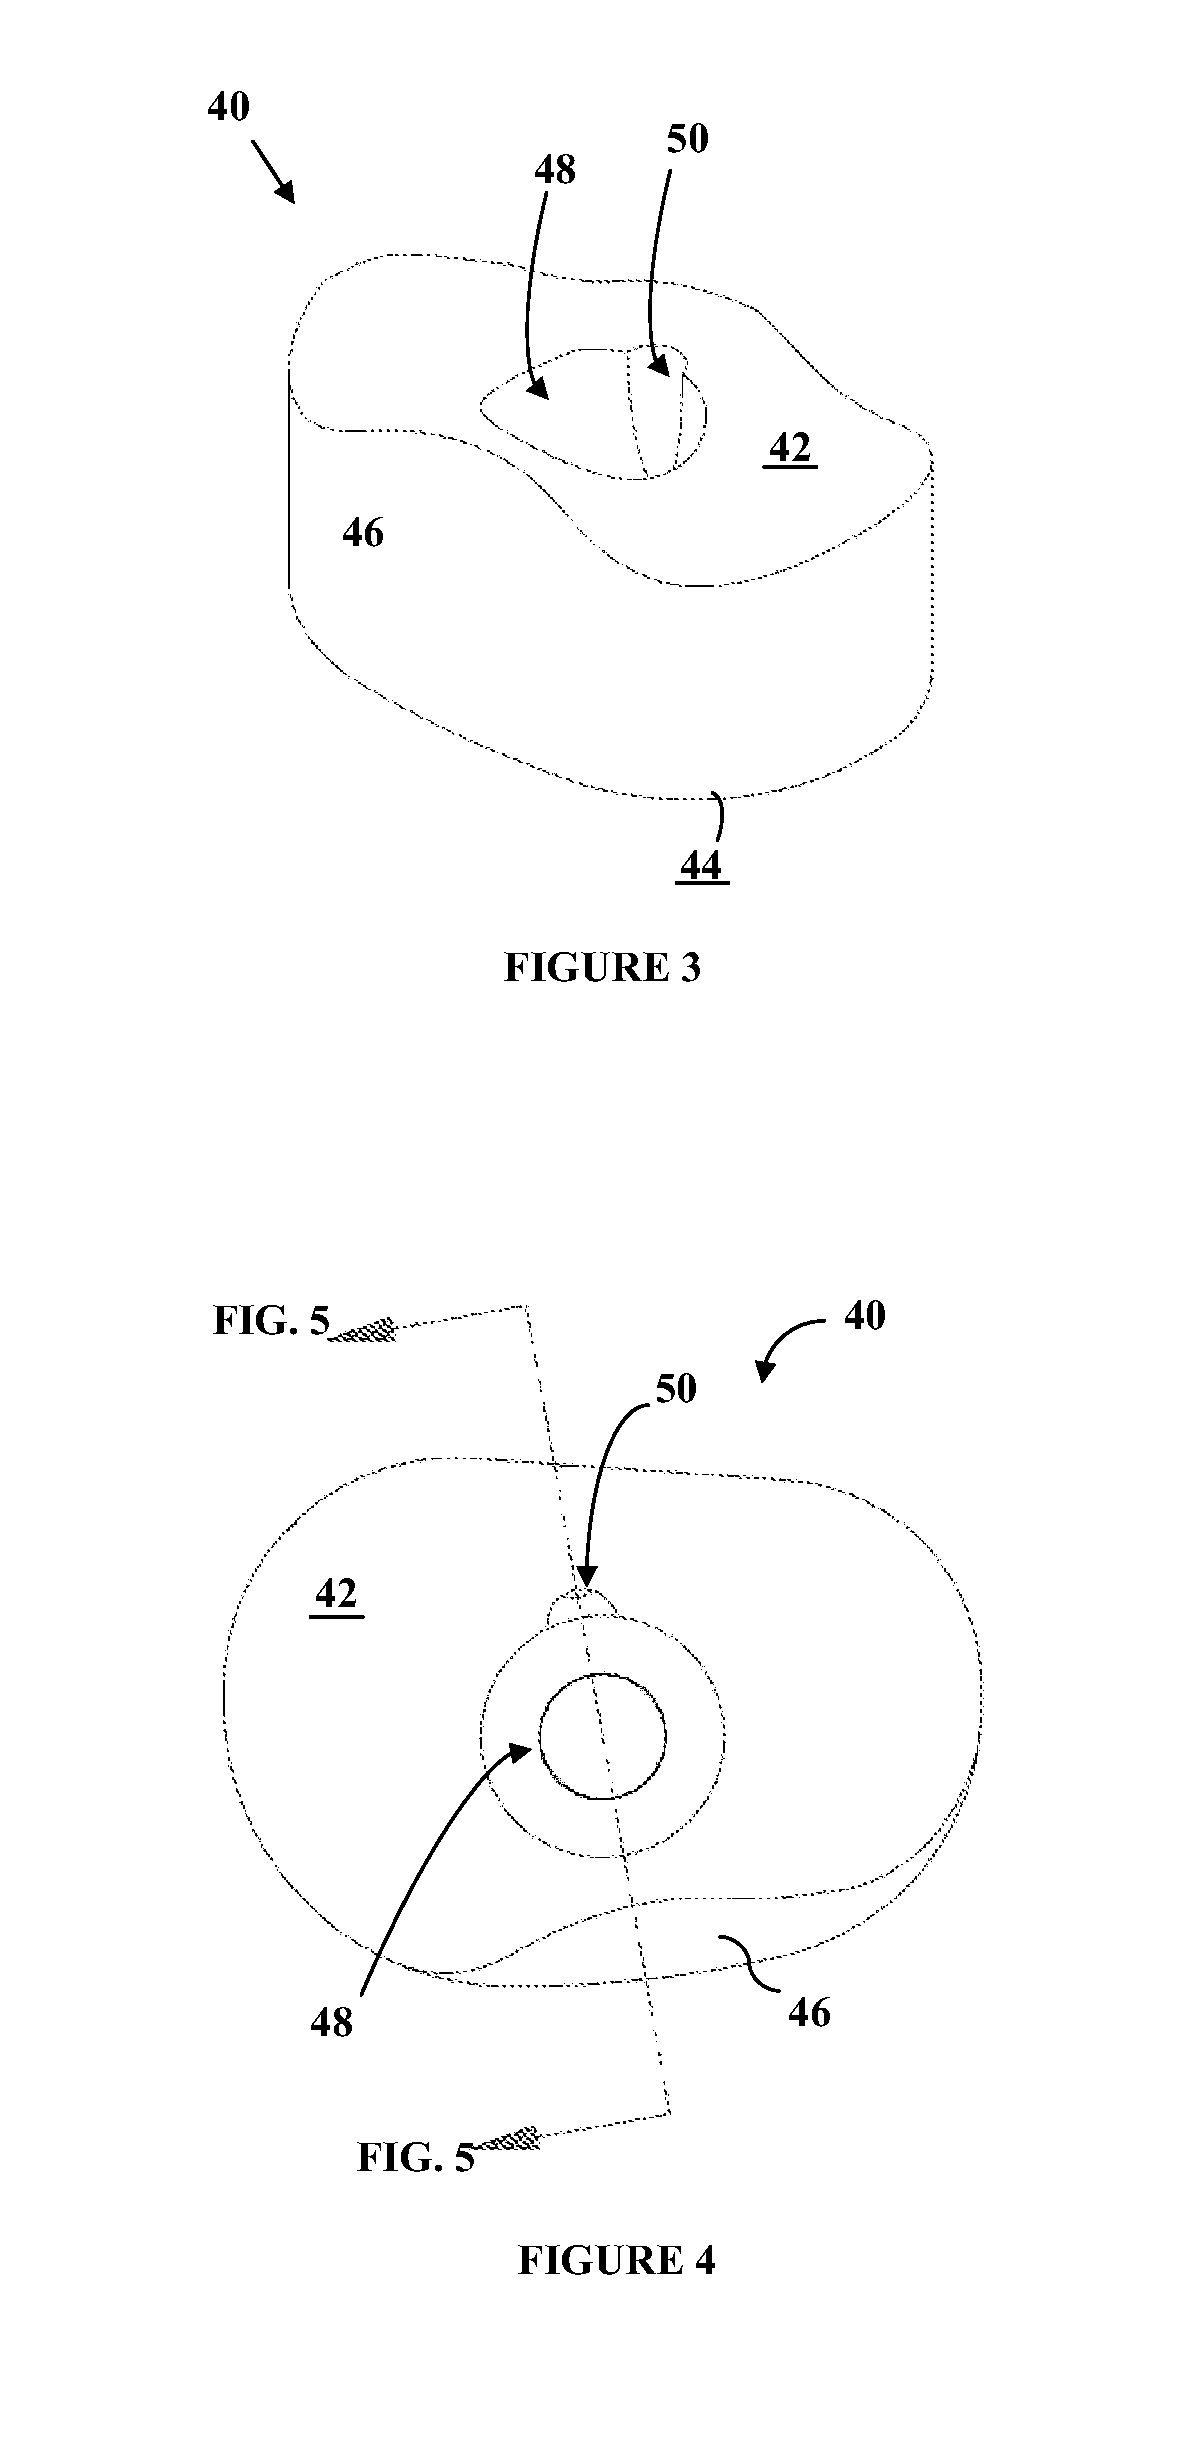 Orthopaedic implant system and fasteners for use therein